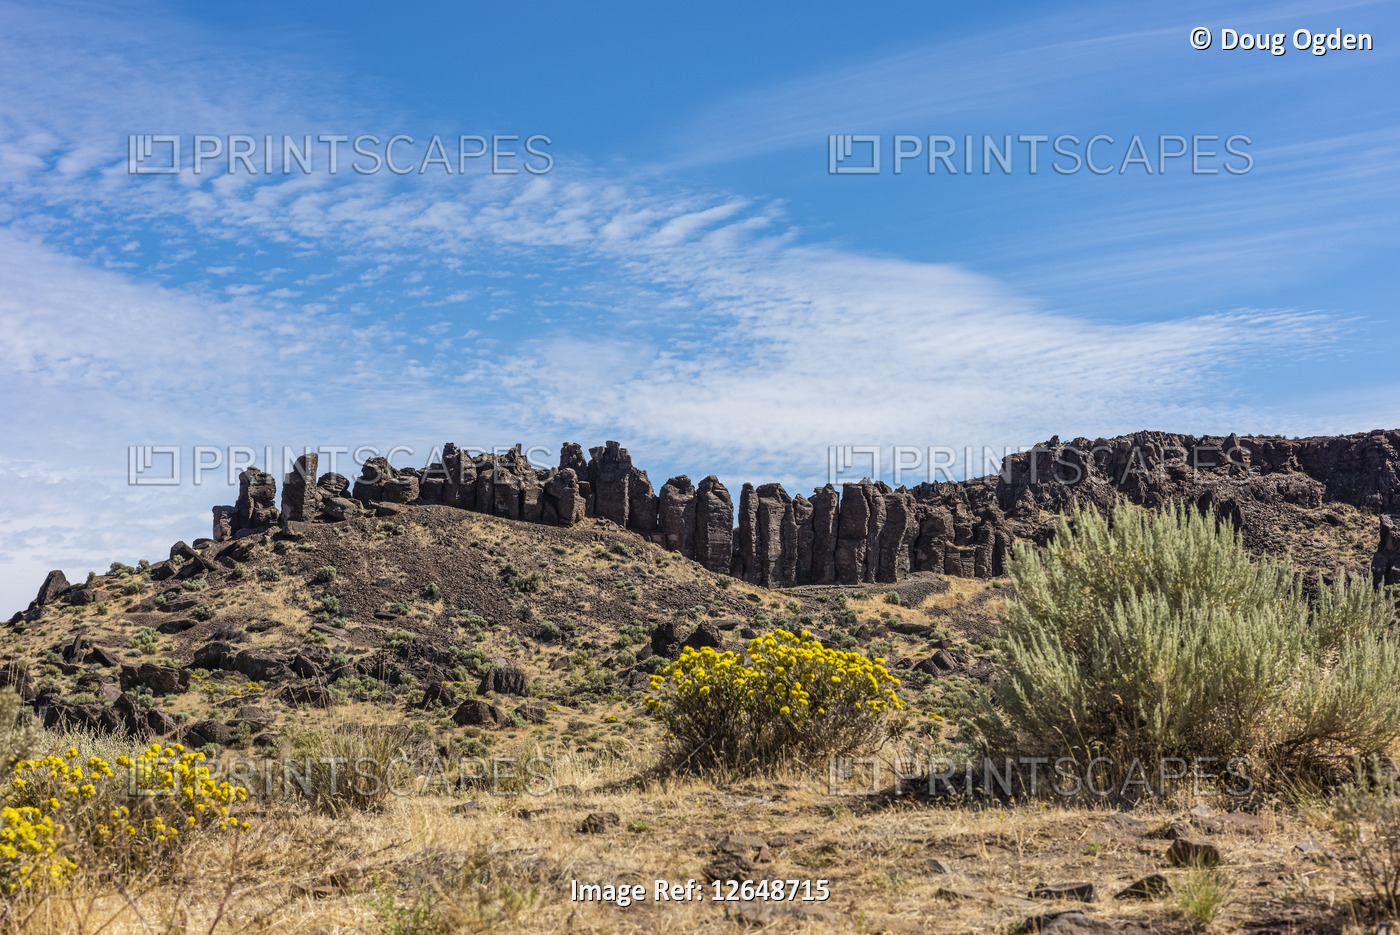 Basalt columns formed when molten lava cooled towering over the Eastern ...